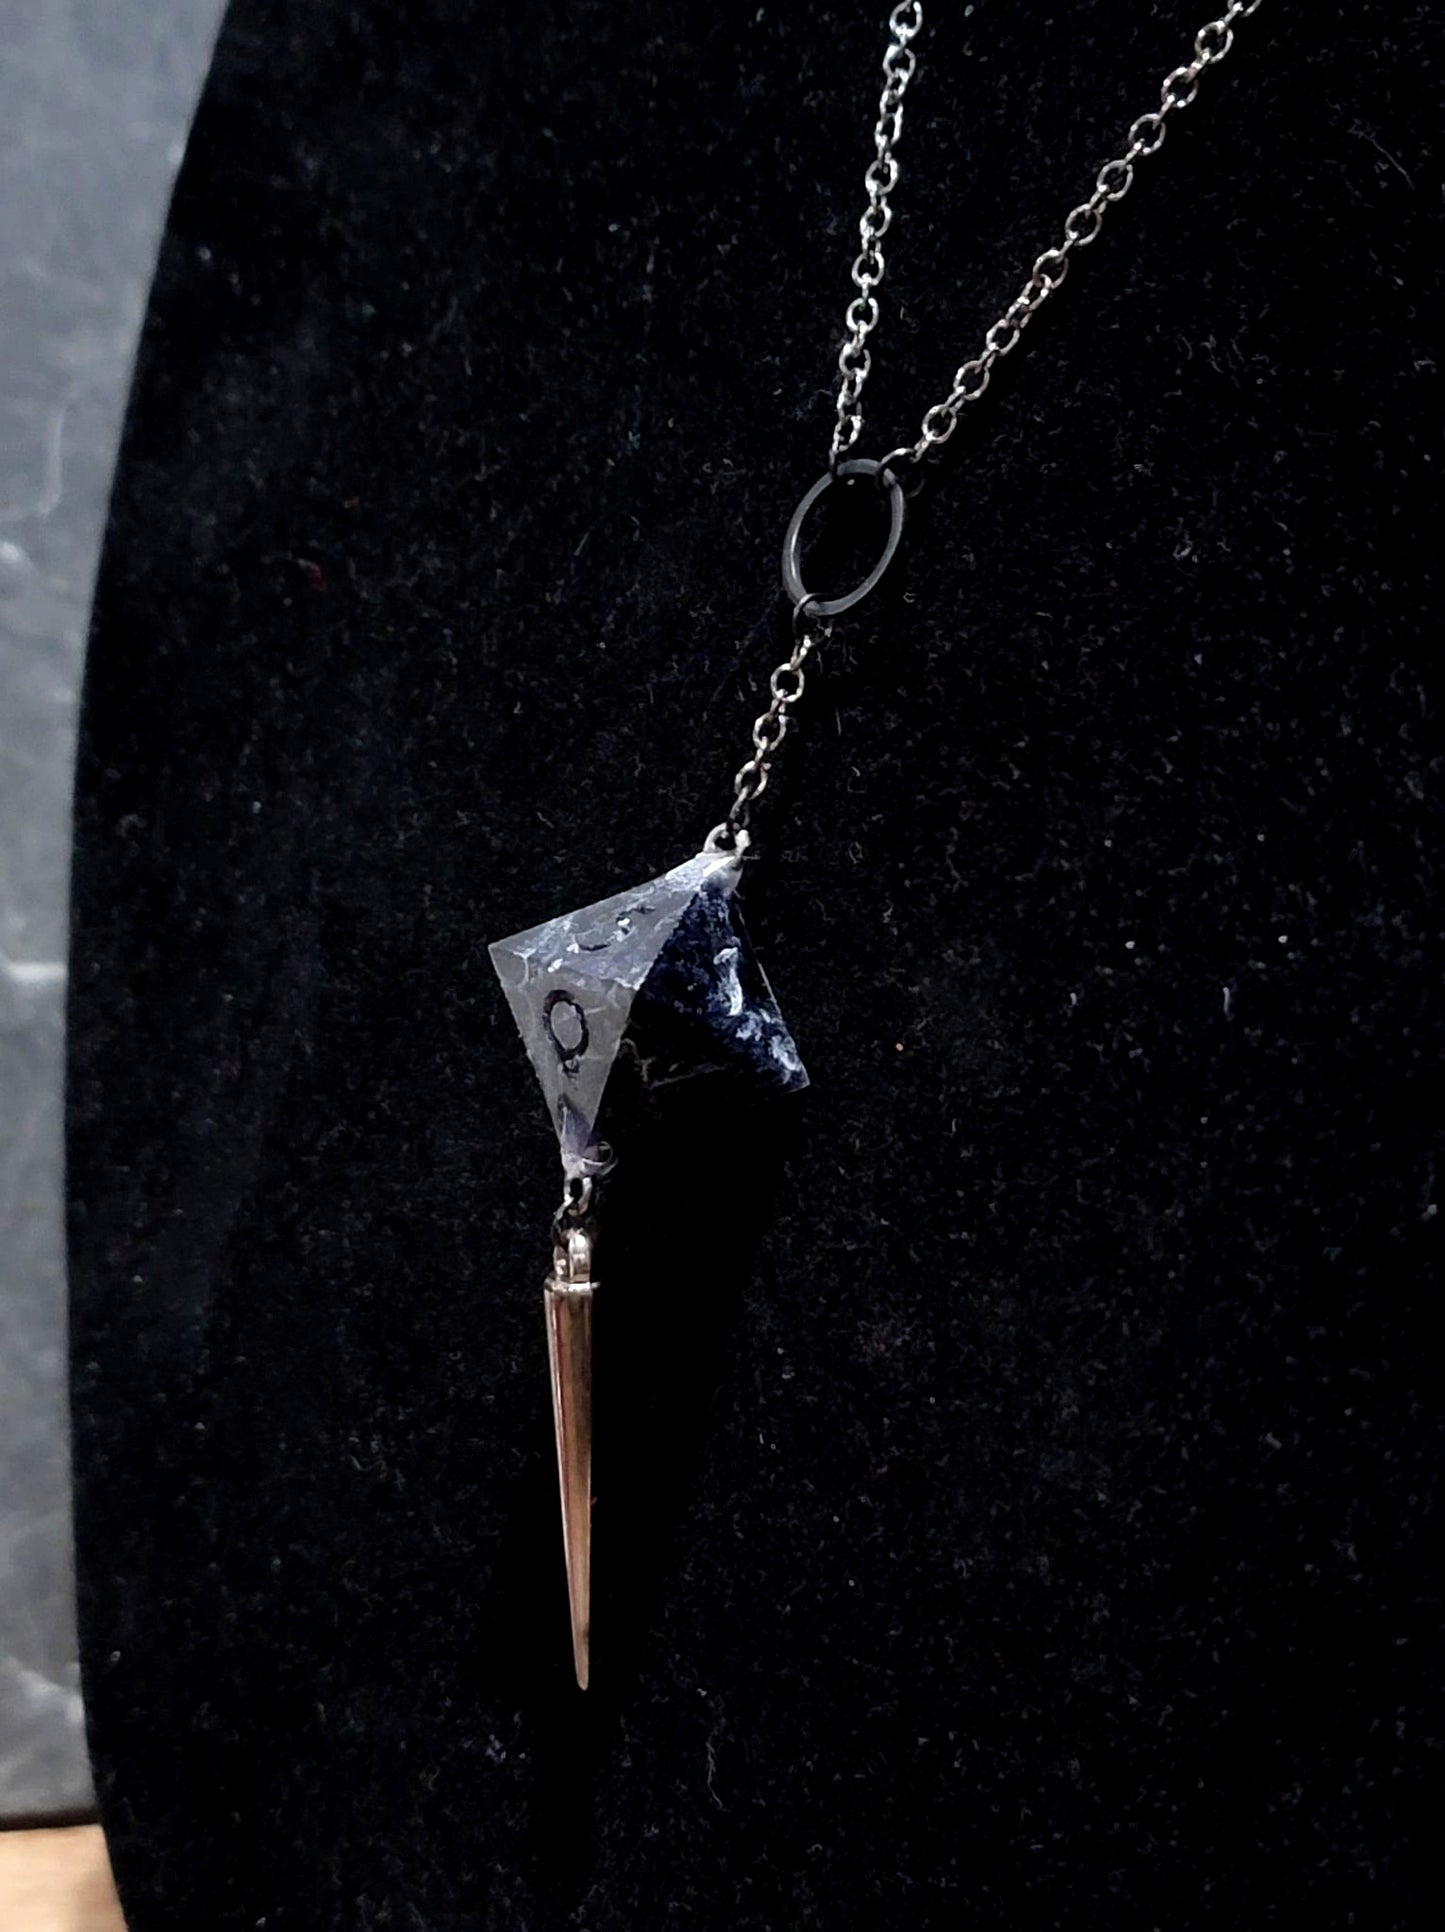 Obsidian Blade - D8 Necklace | Handmade Dice Jewelry |